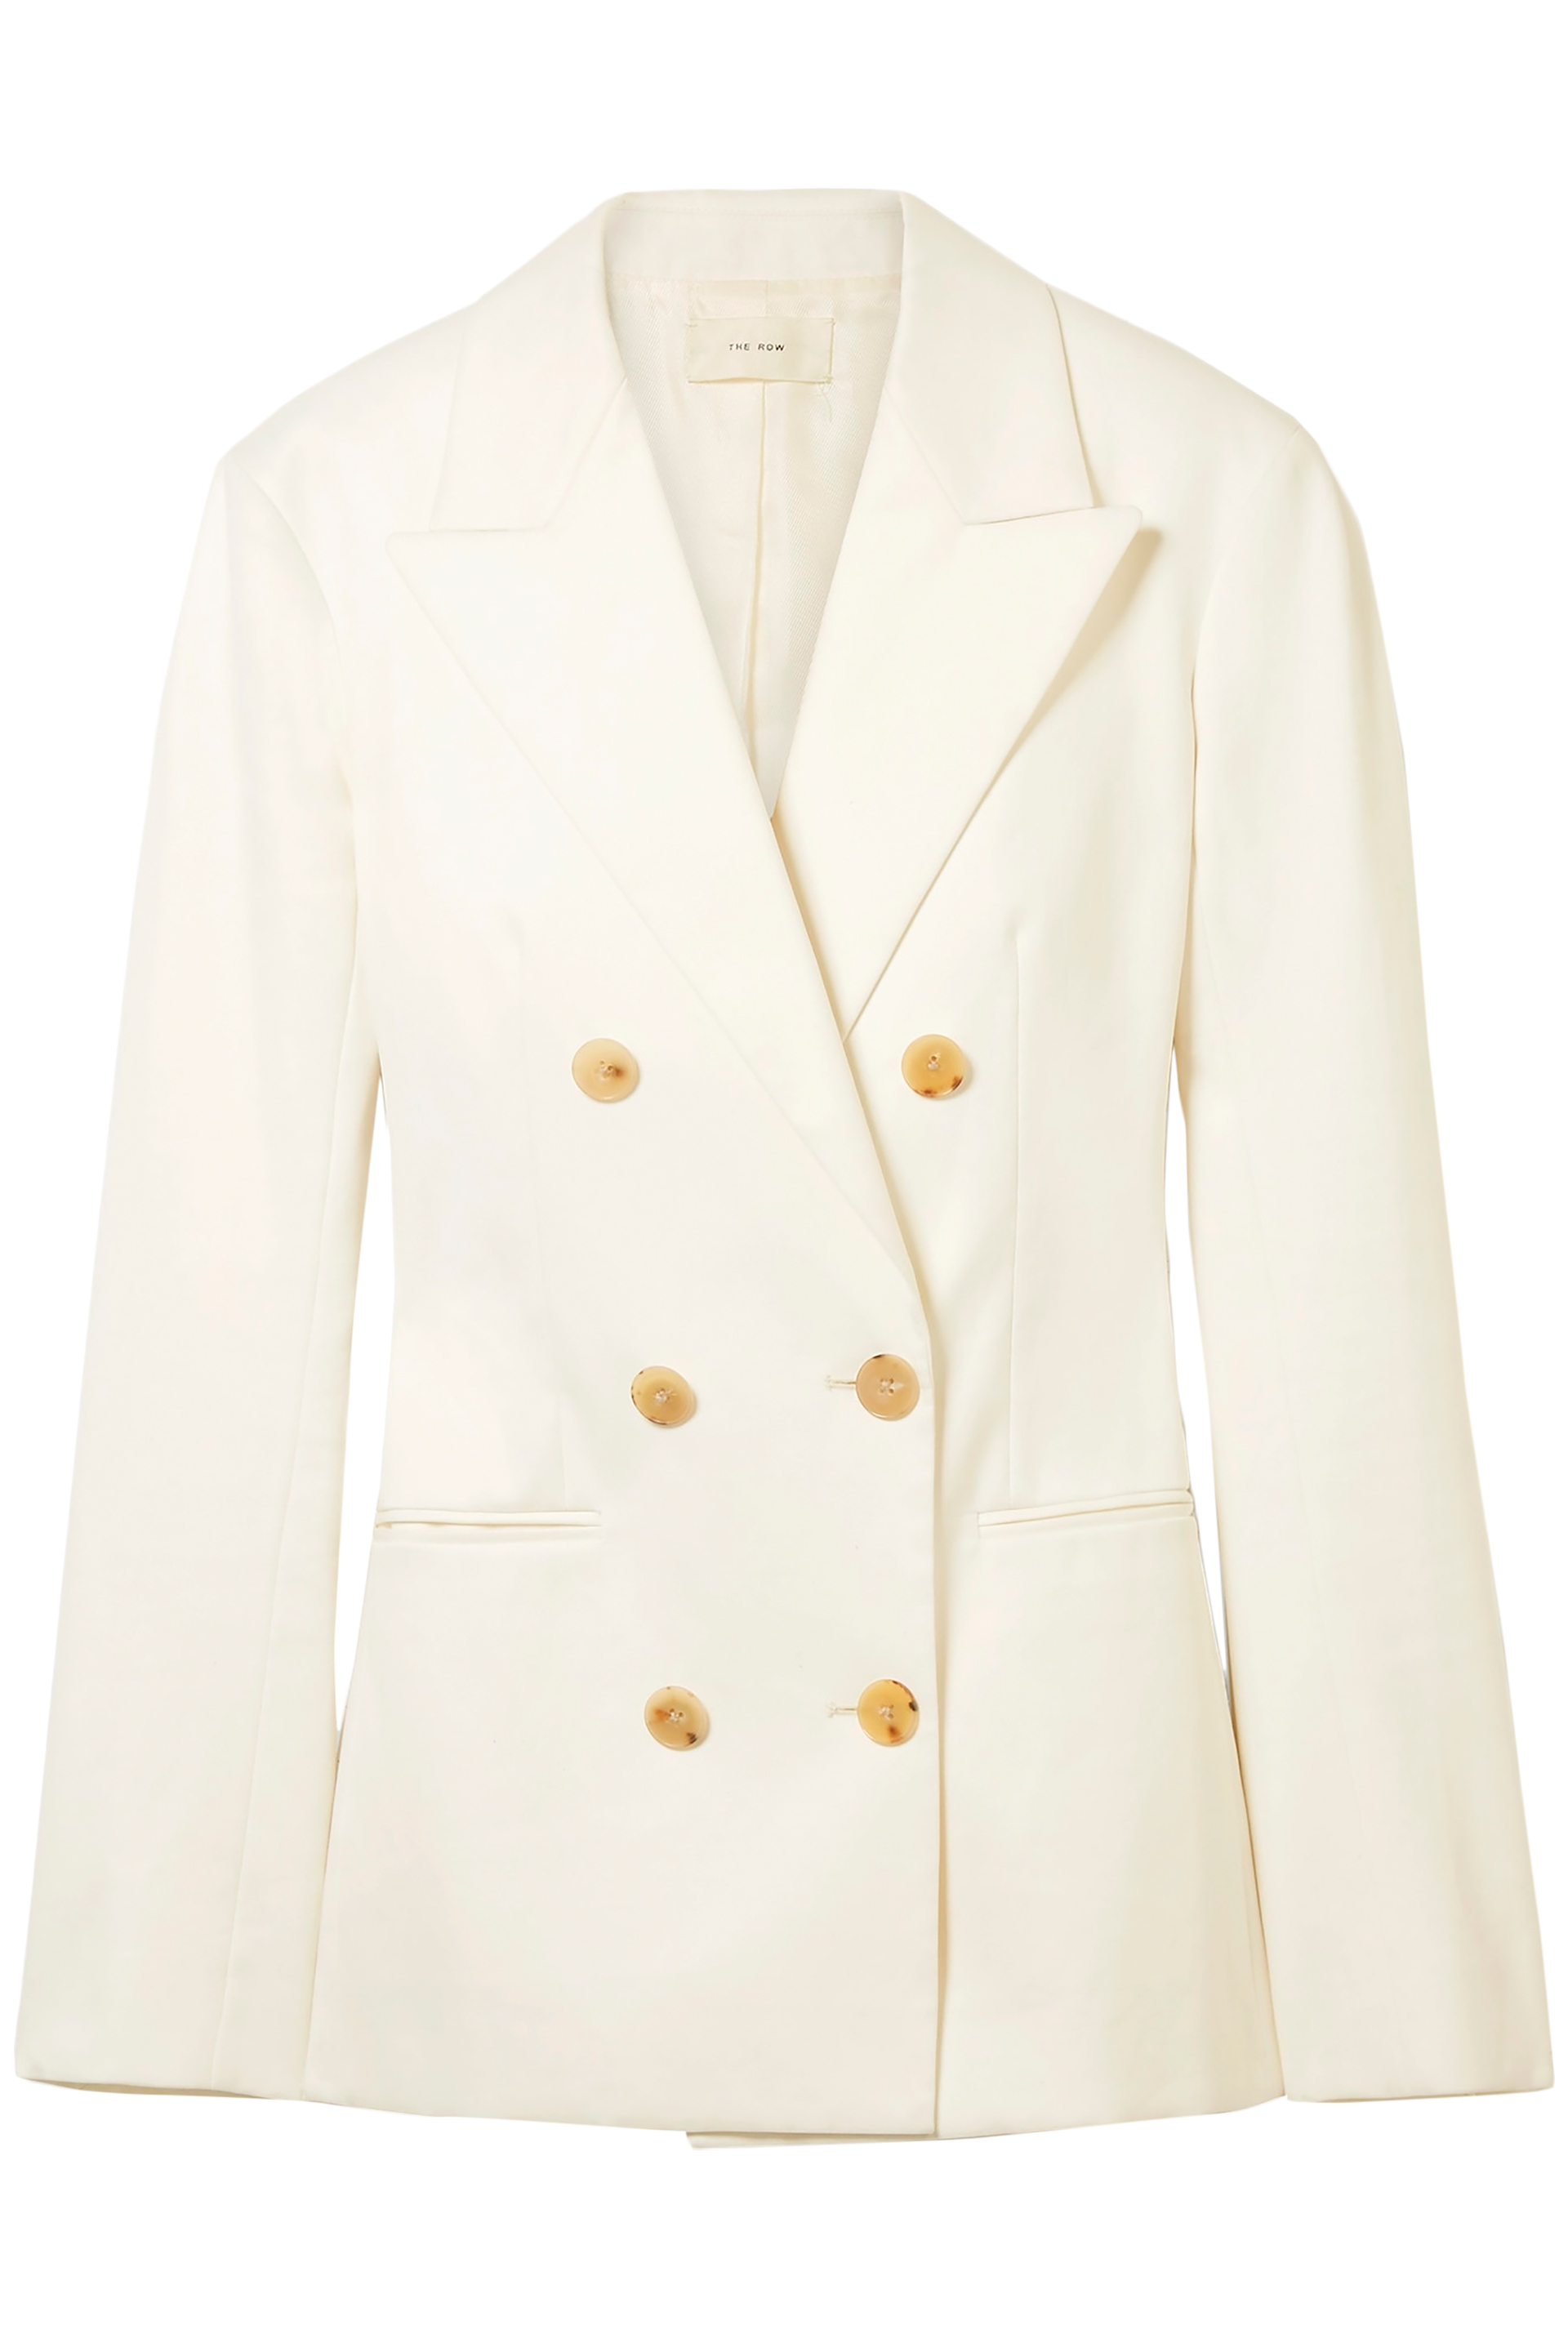 Women's Designer Blazers | Sale Up To 70% Off At THE OUTNET